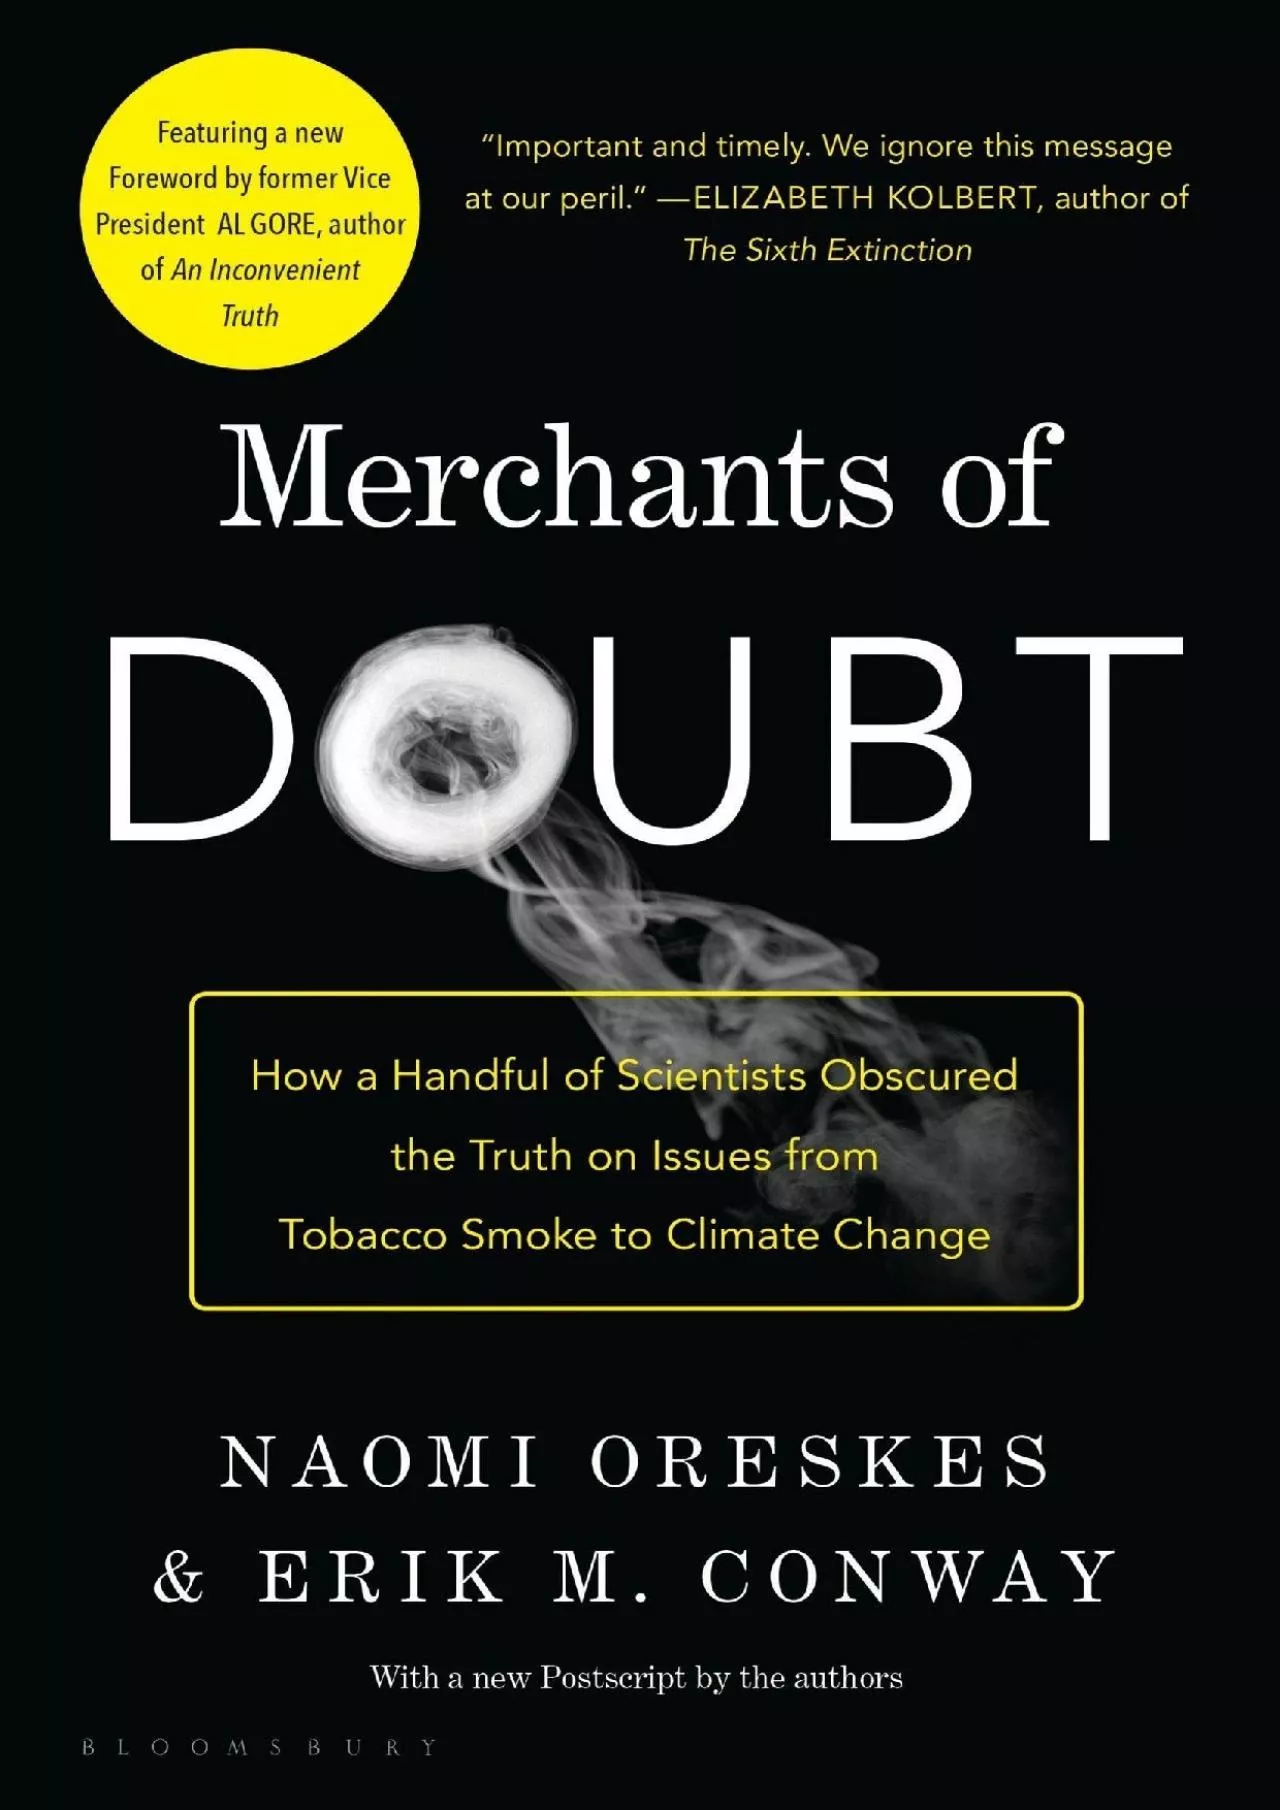 (DOWNLOAD)-Merchants of Doubt: How a Handful of Scientists Obscured the Truth on Issues